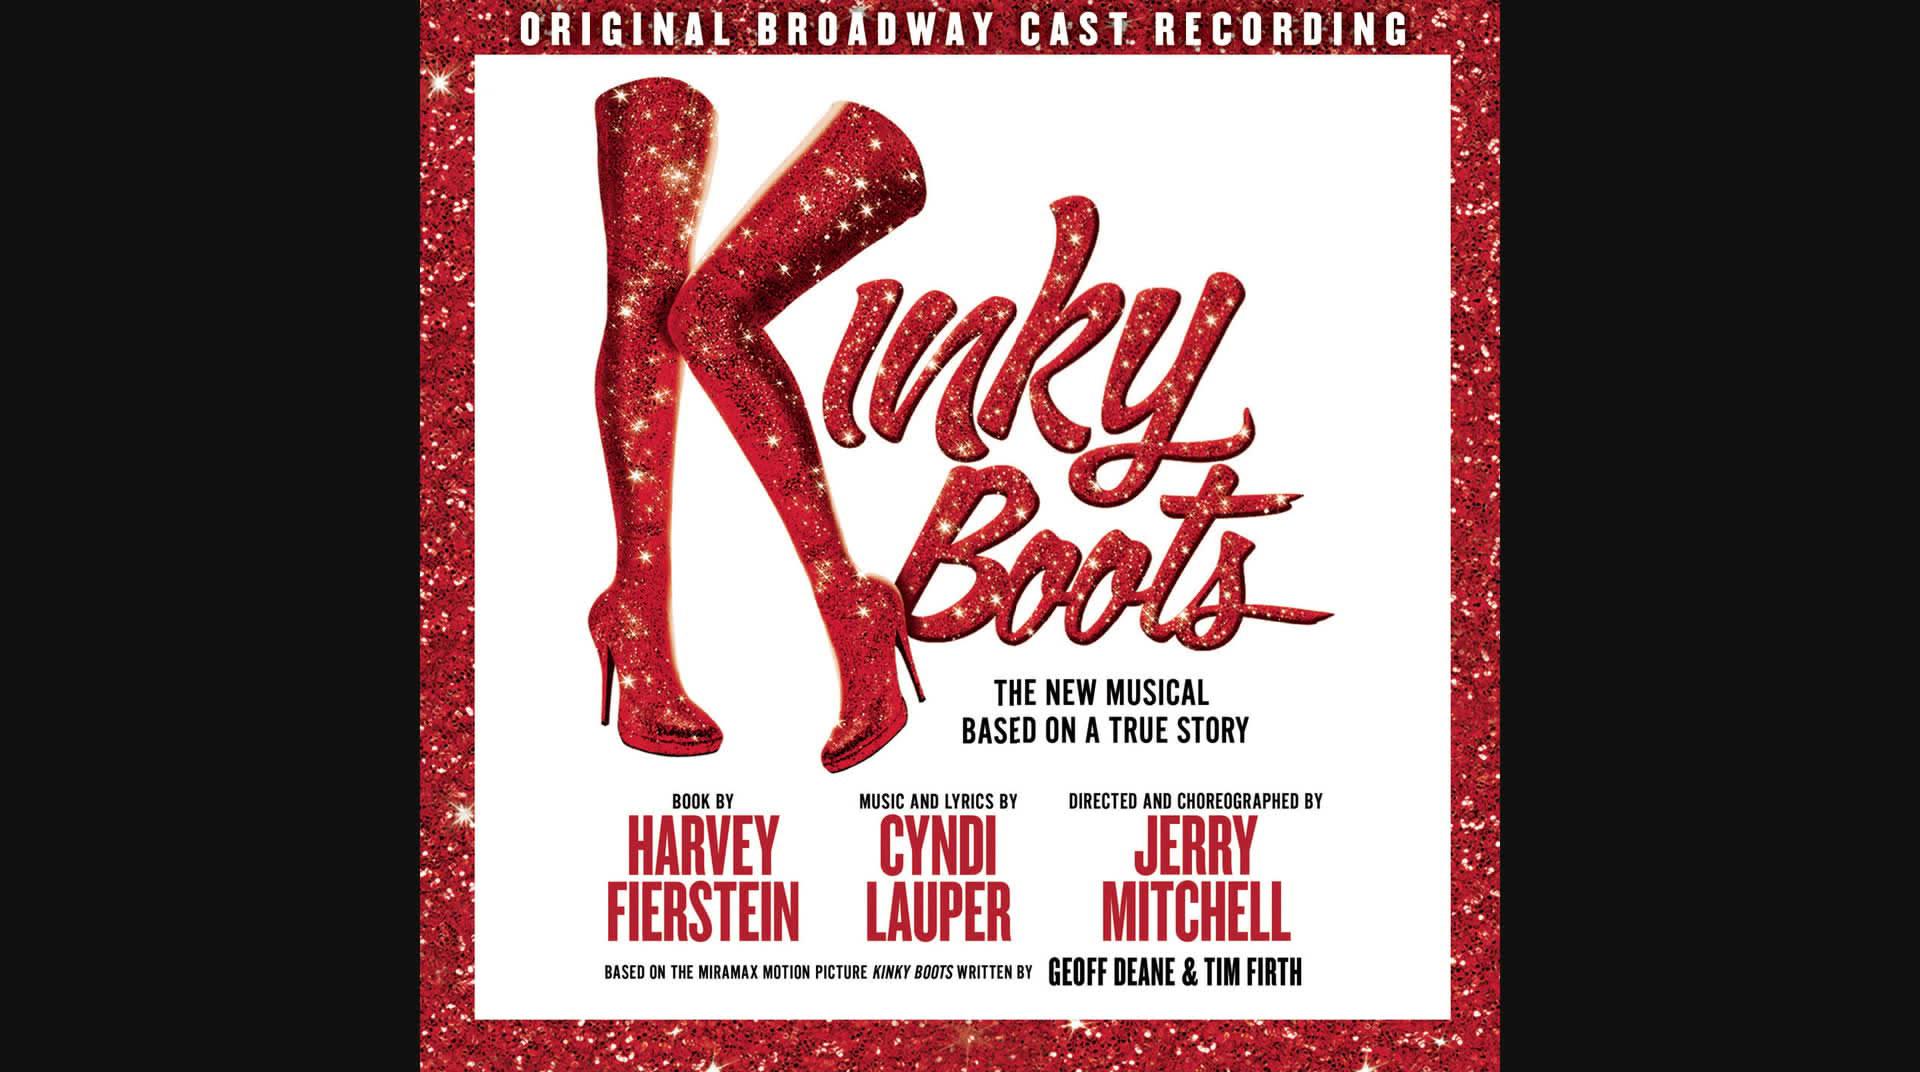 Kinky Boots Original Broadway Cast Recording - Take What You Got (Audio)